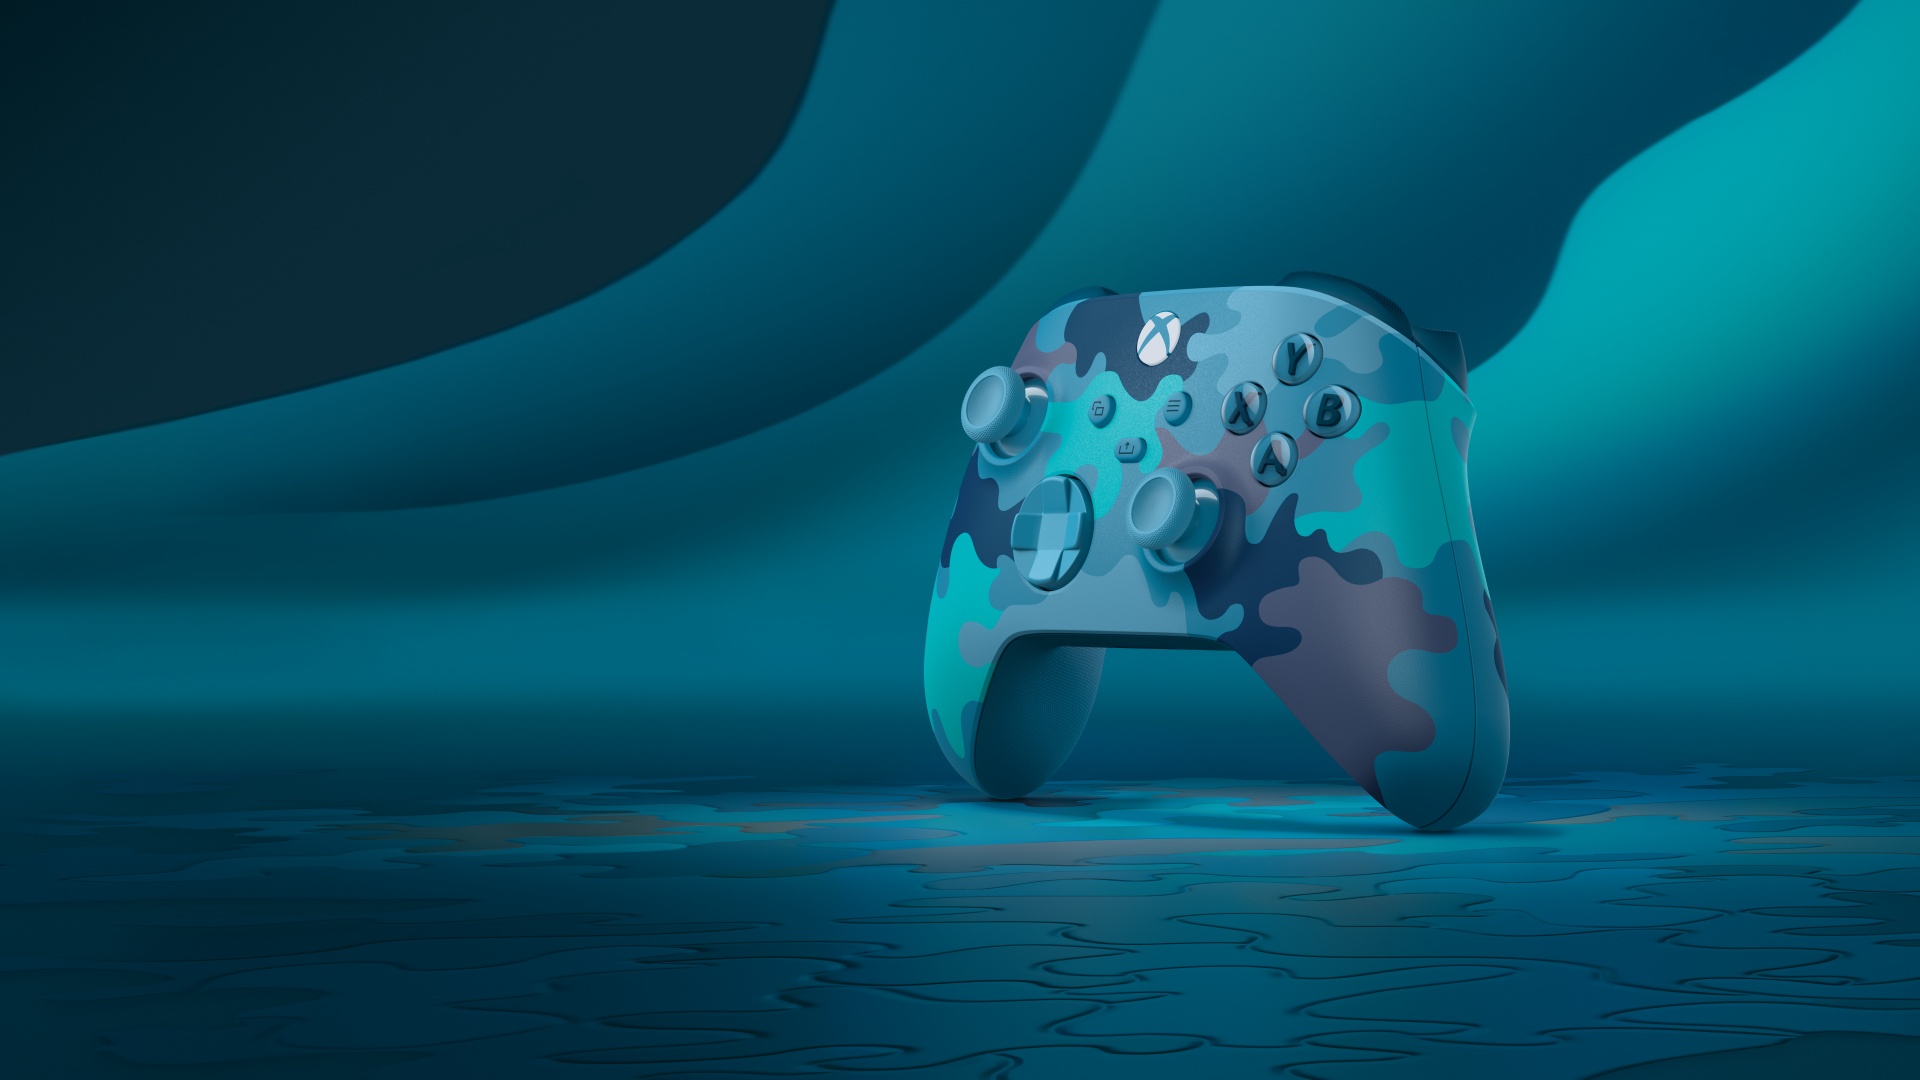 Enhanced immersion starts with a controller that lets you play in style. The new Xbox Wireless Controller – Mineral Camo Special Edition is the fourth addition to our camo series alongside Night Ops Camo, Arctic Camo, and Daystrike Camo. The Mineral Camo controller features a bold mineral blue, bright purple, aqua, and dark purple camouflage […]